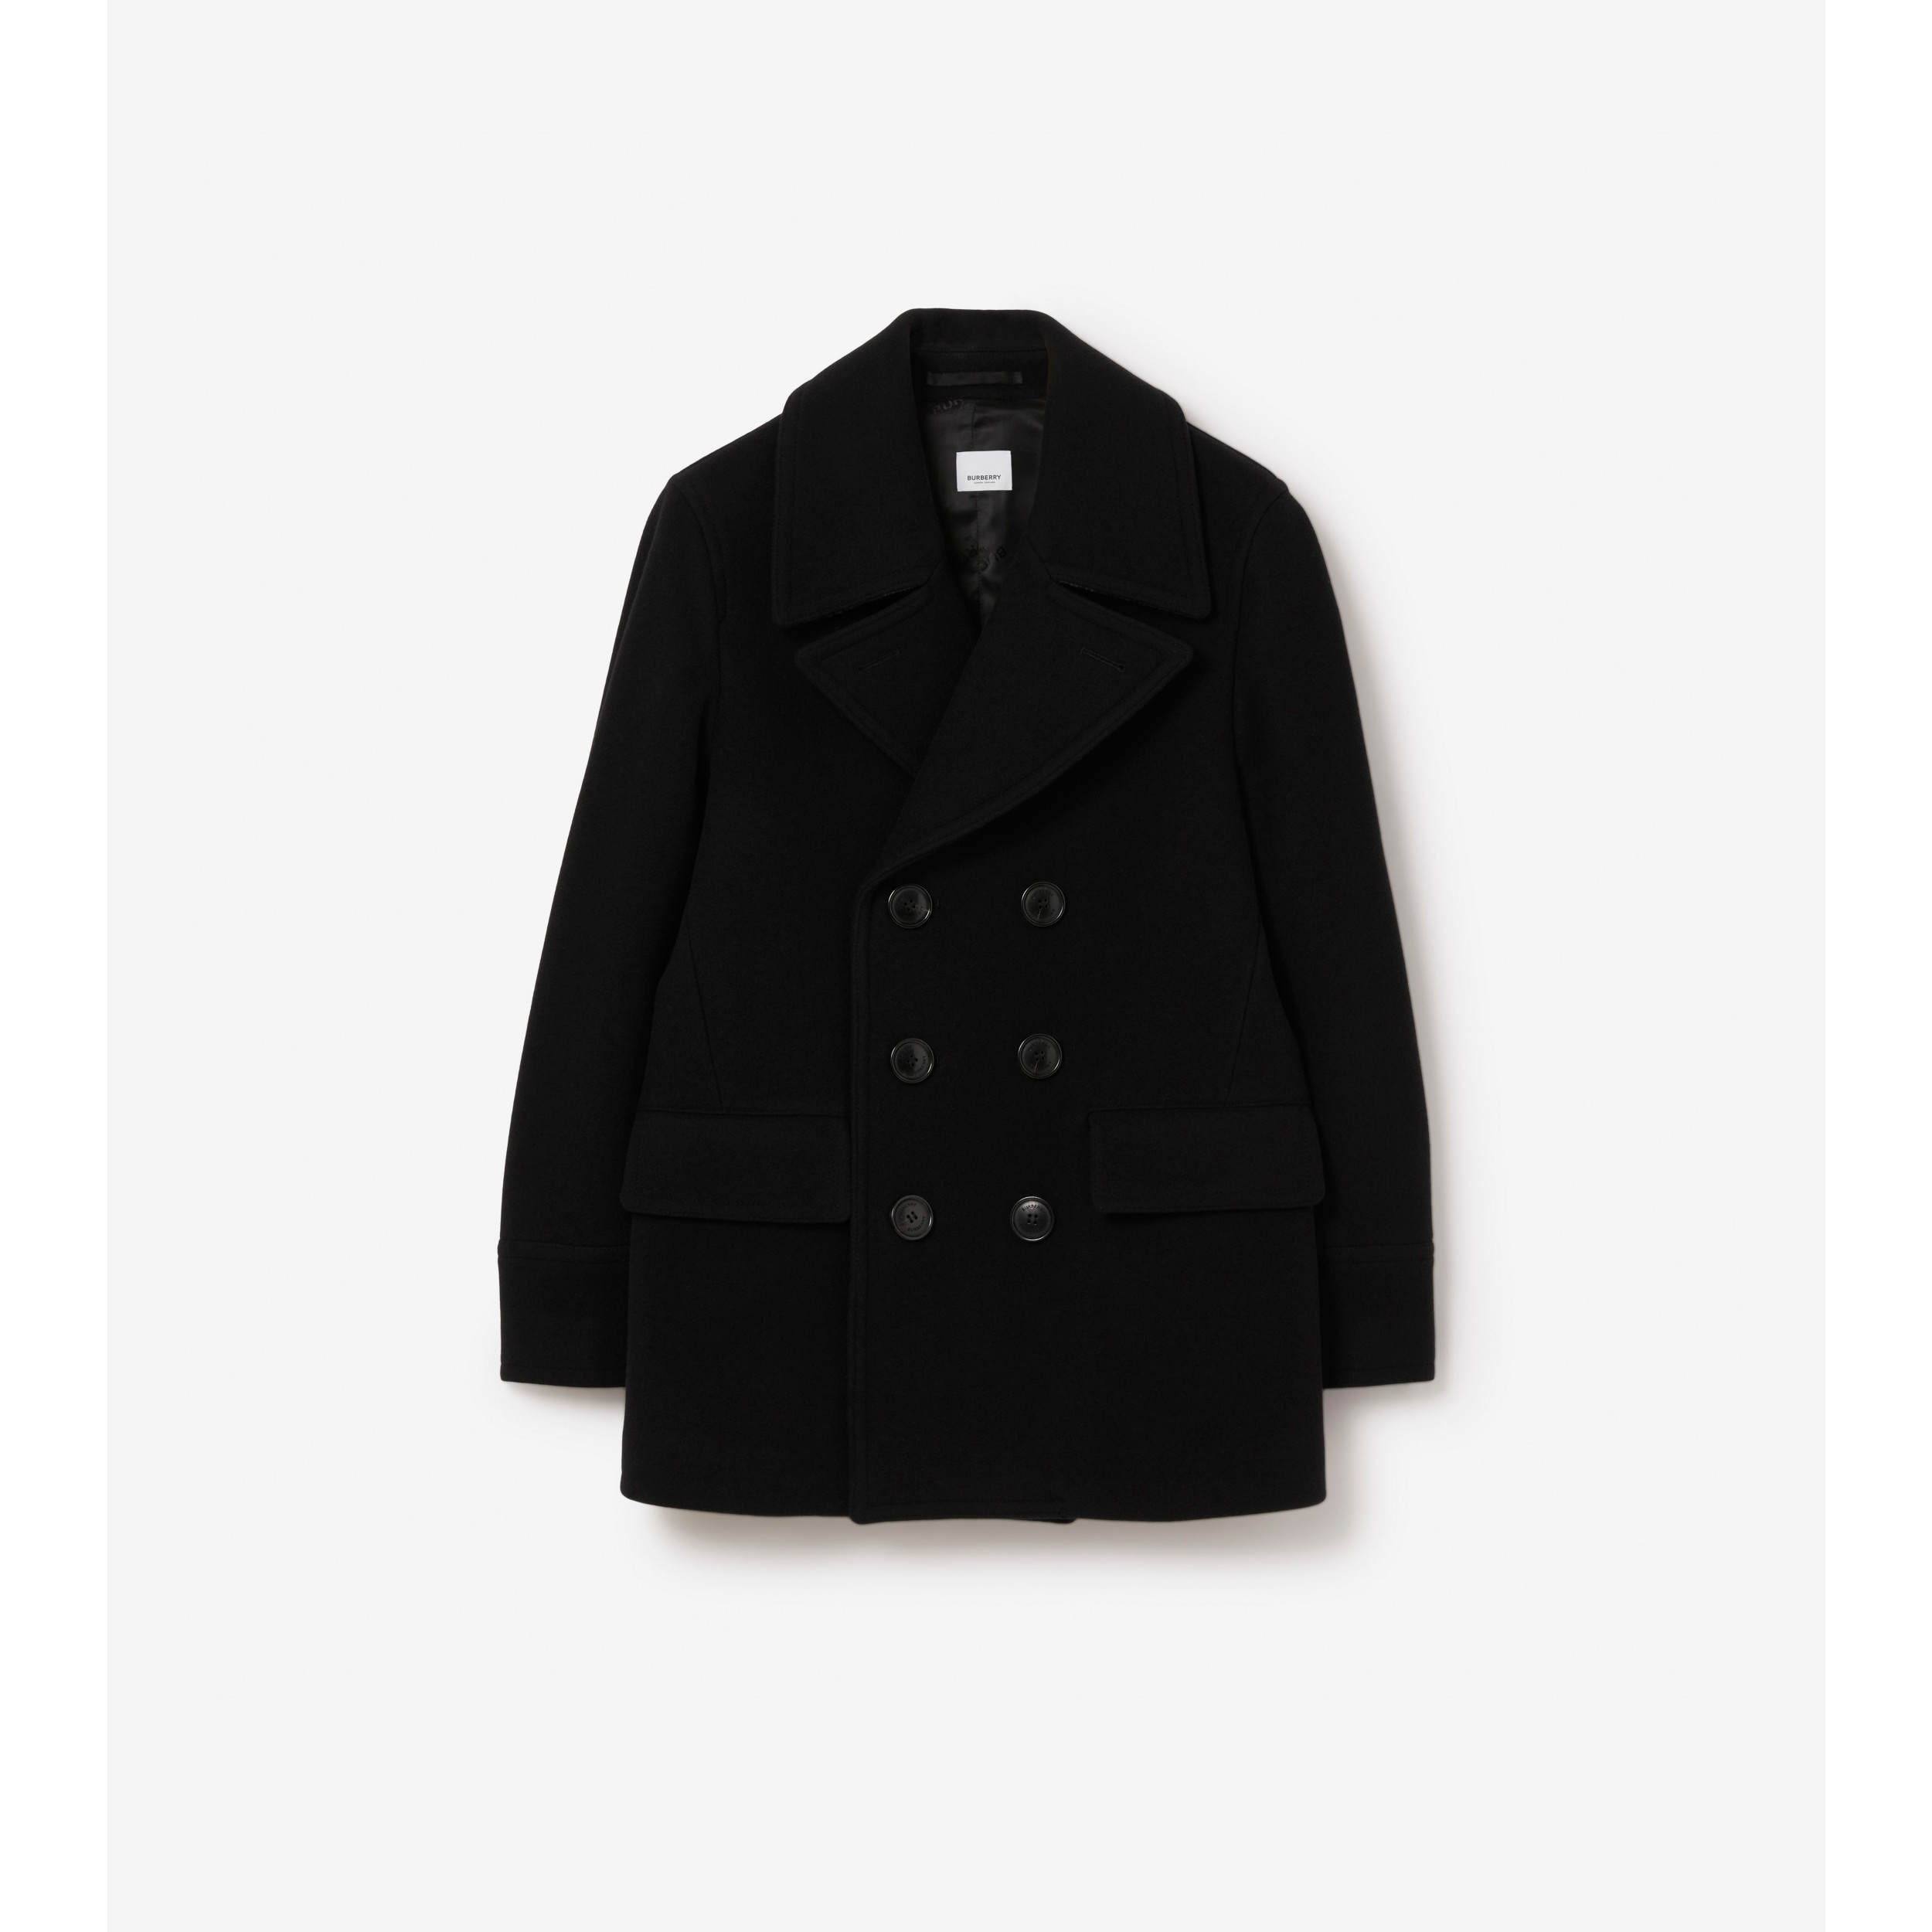 Burberry Double-Breasted Pea Coat